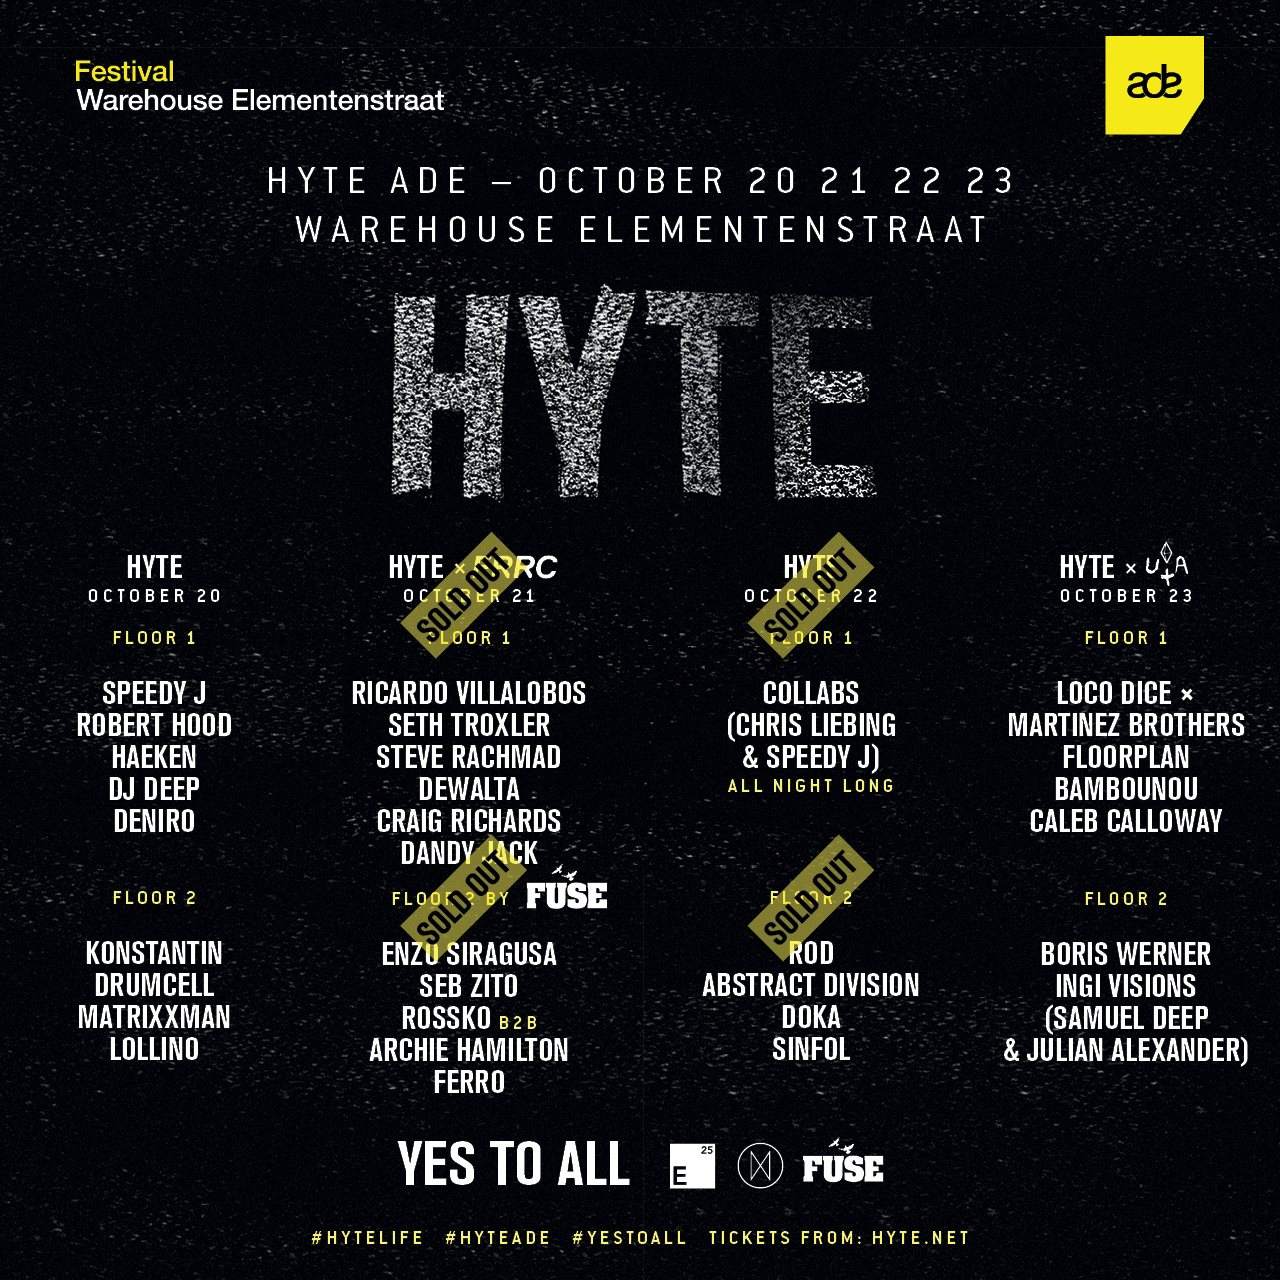 Hyte ADE x Used + Abused with Loco Dice x The Martinez Brothers, Floorplan - Página frontal